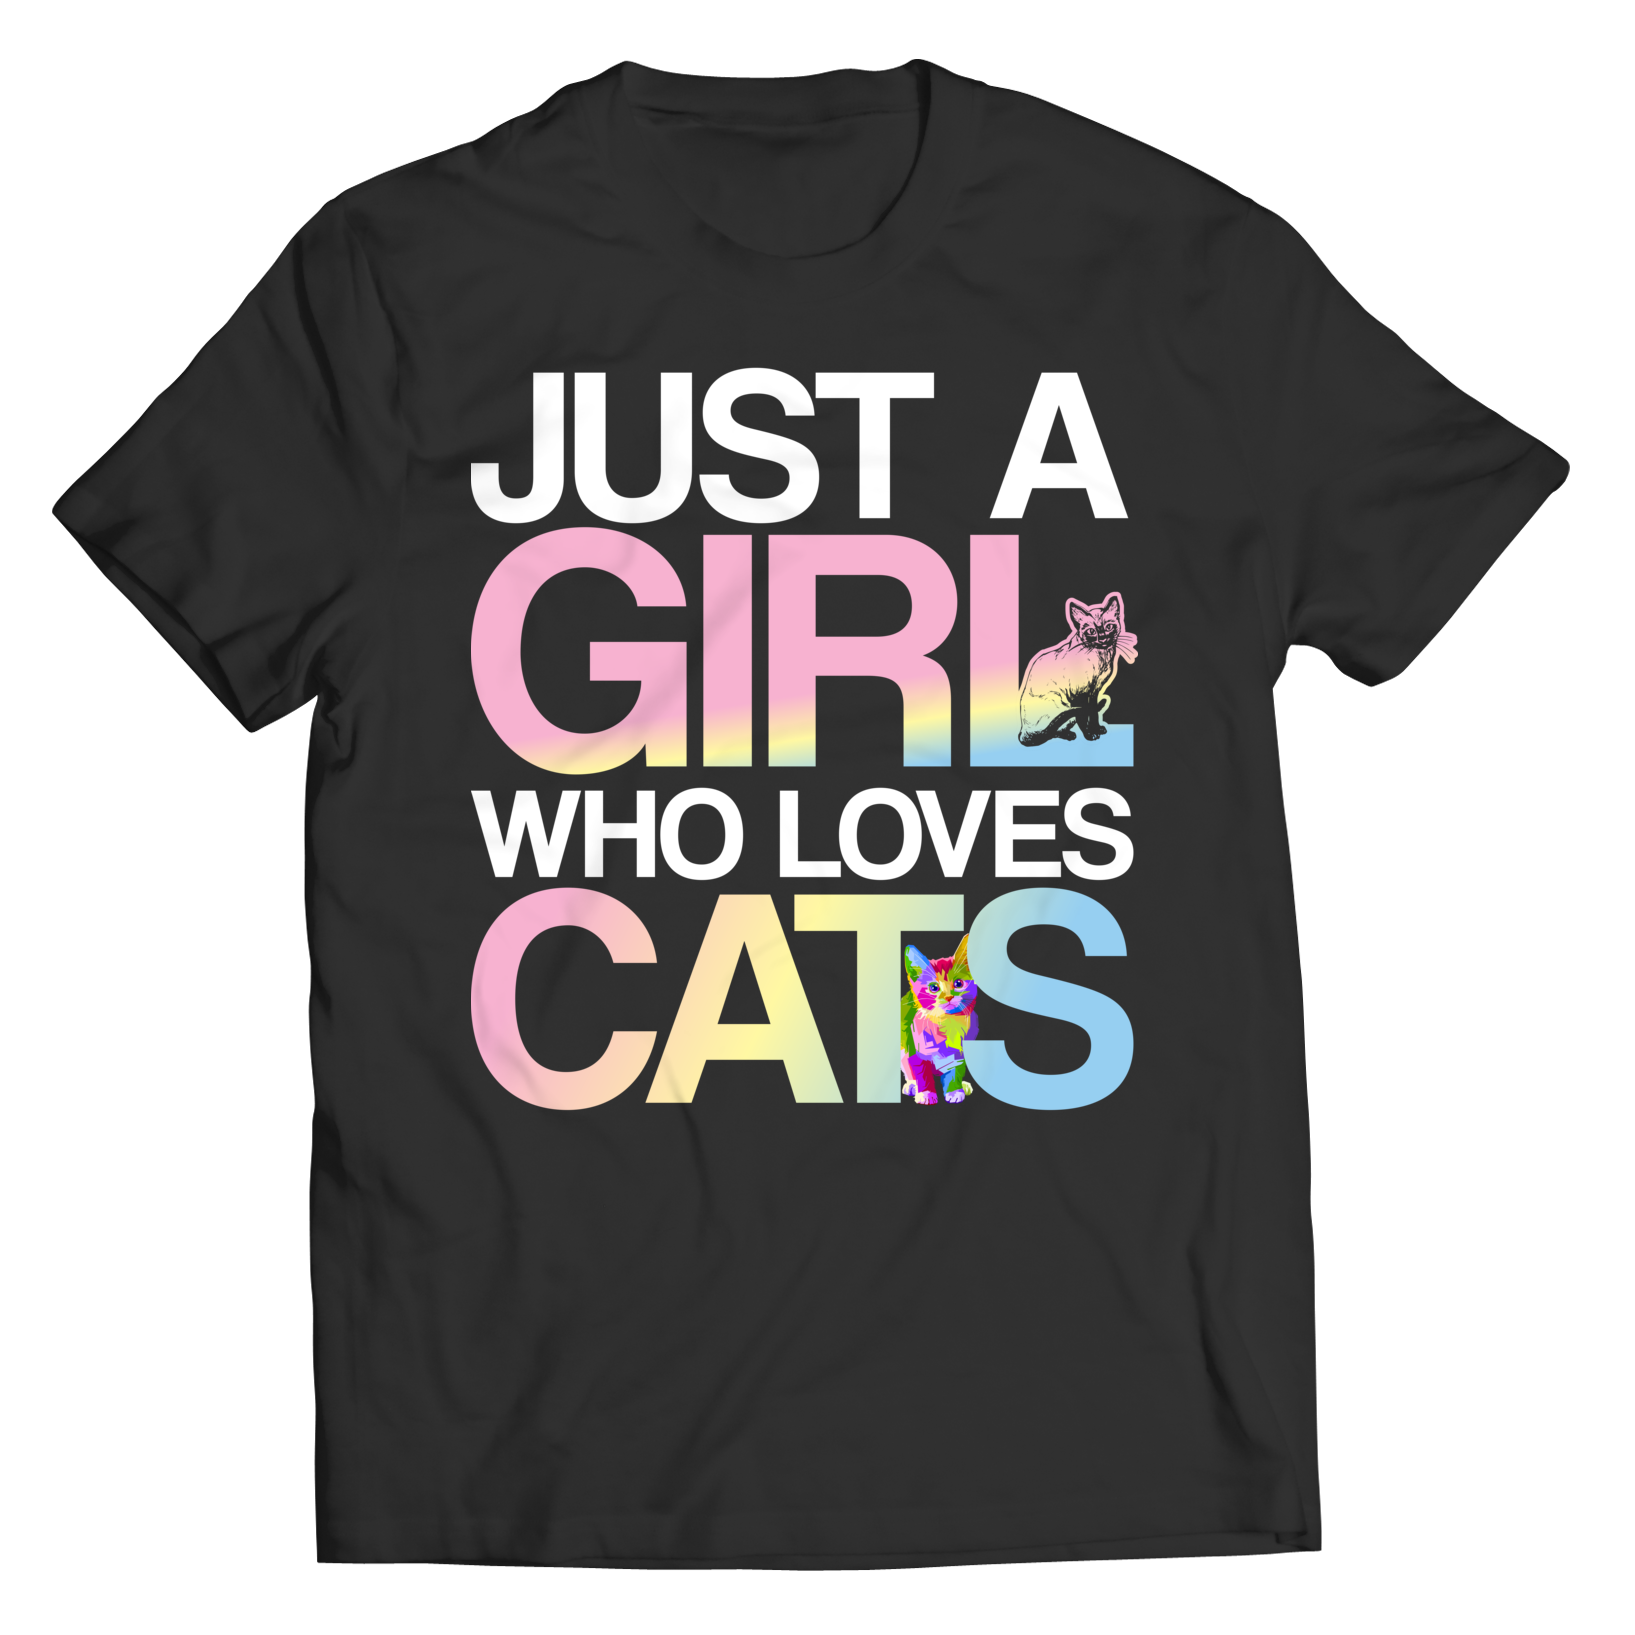 Cats Lovers - Shirts